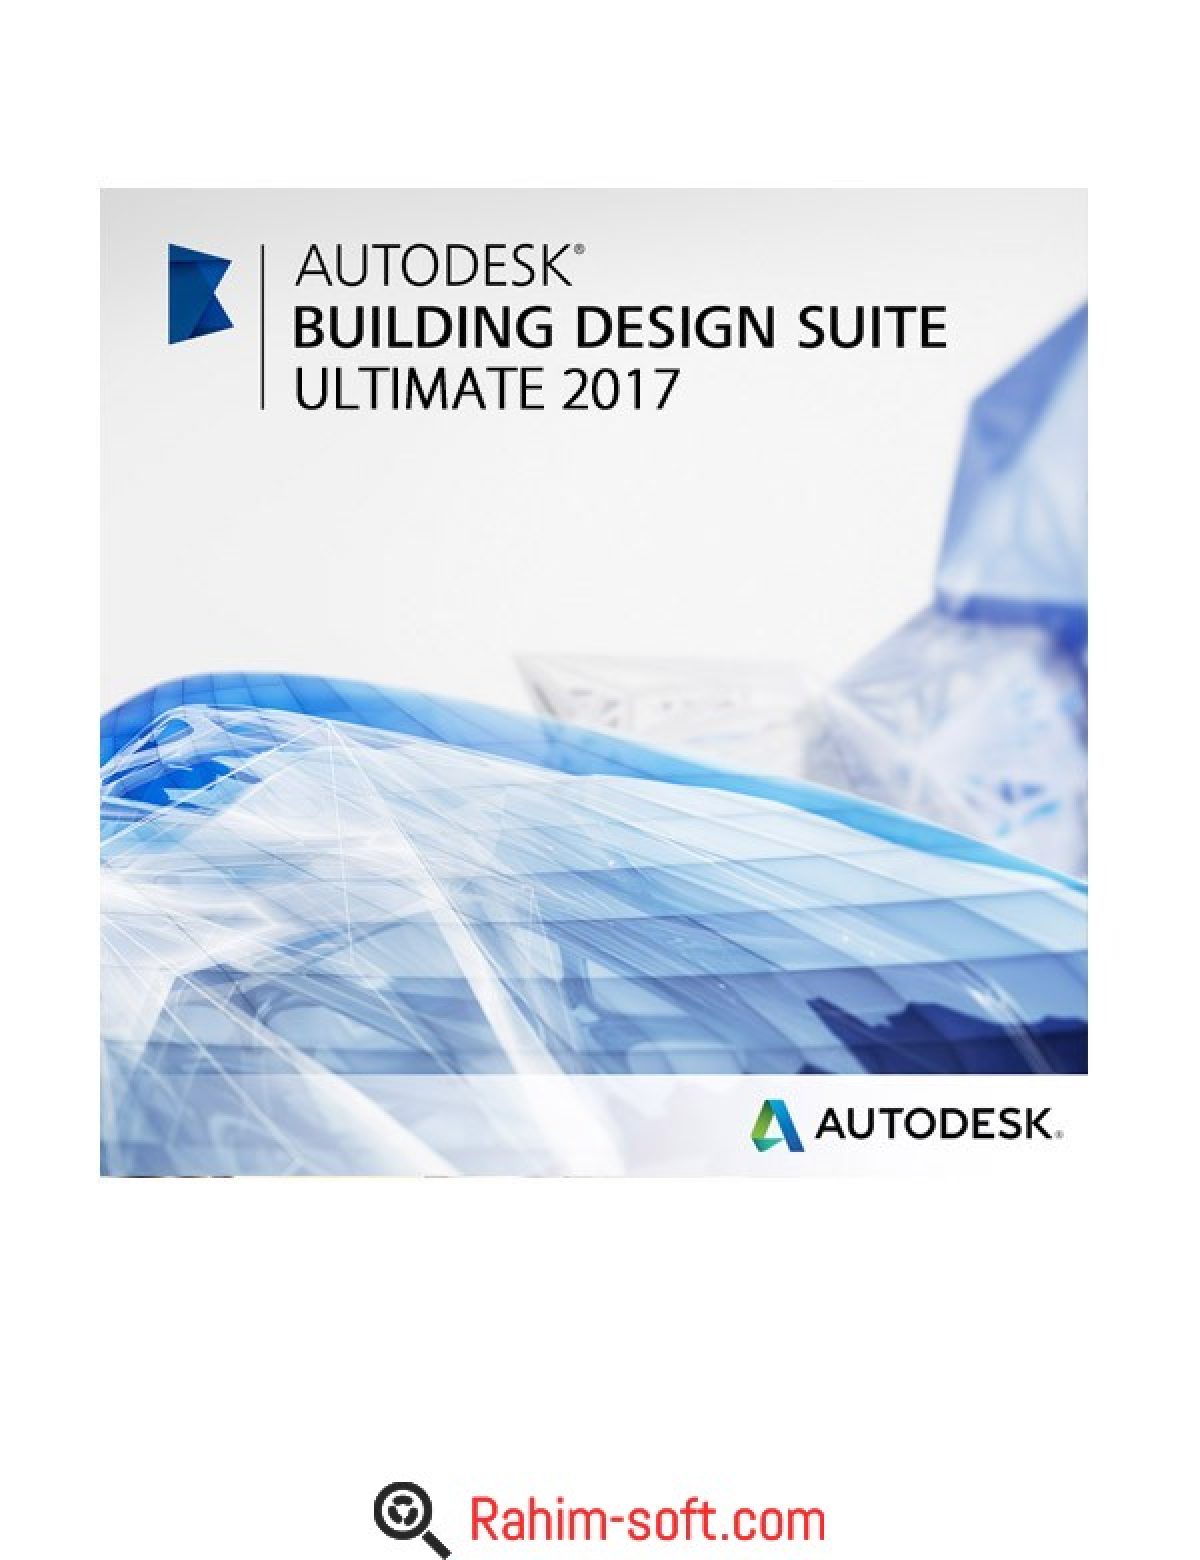 Where to buy Building Design Suite Ultimate 2017